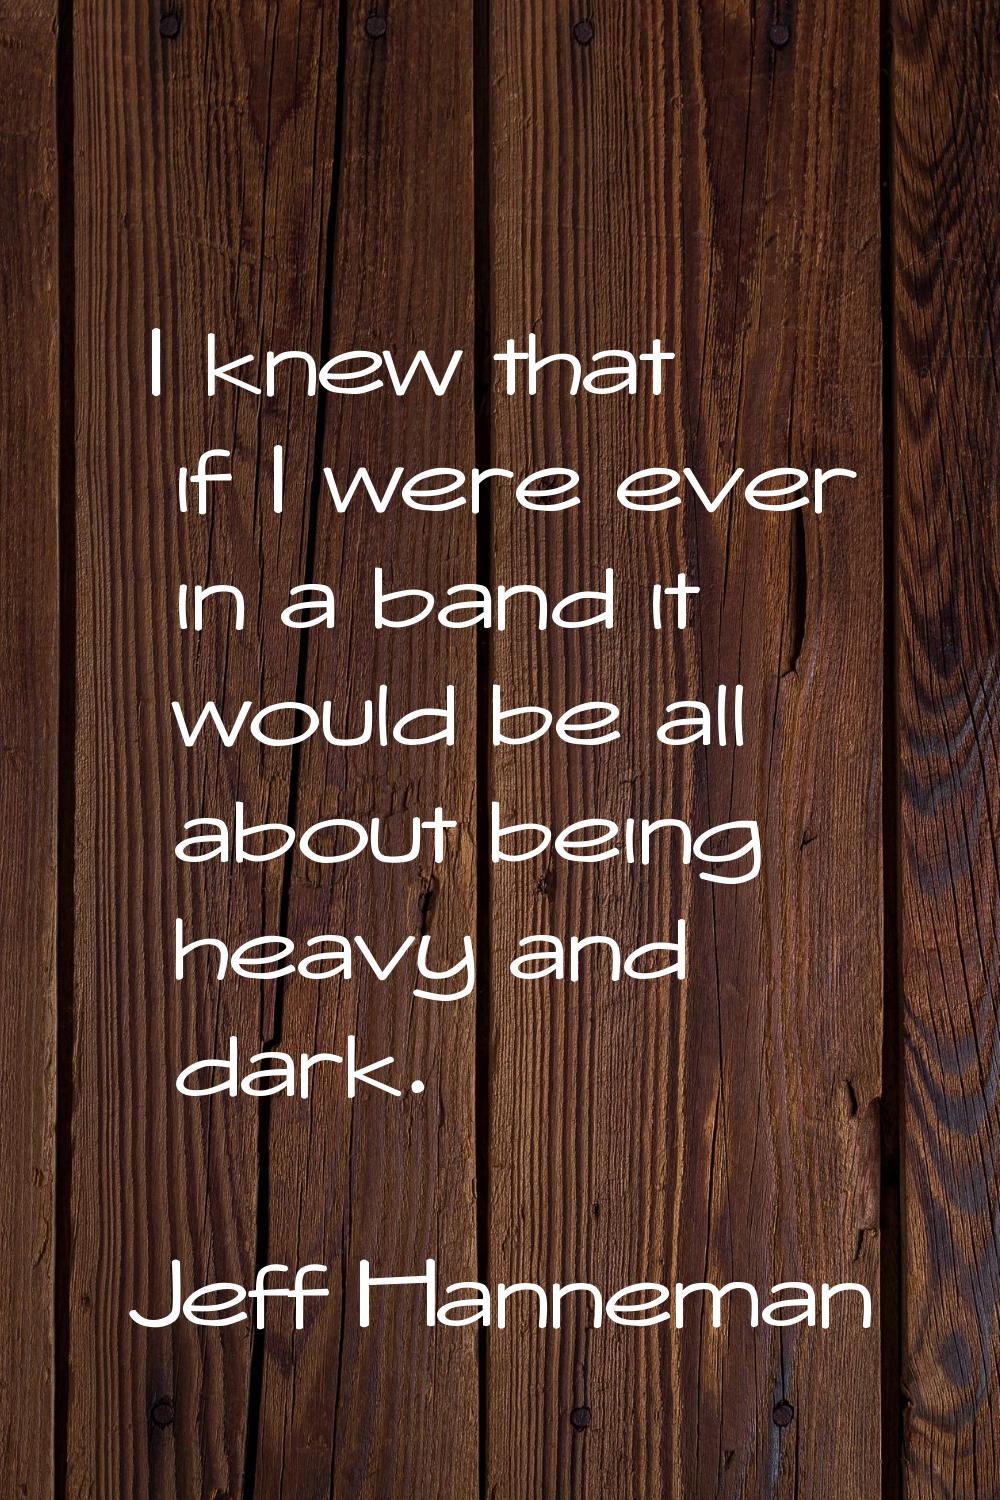 I knew that if I were ever in a band it would be all about being heavy and dark.